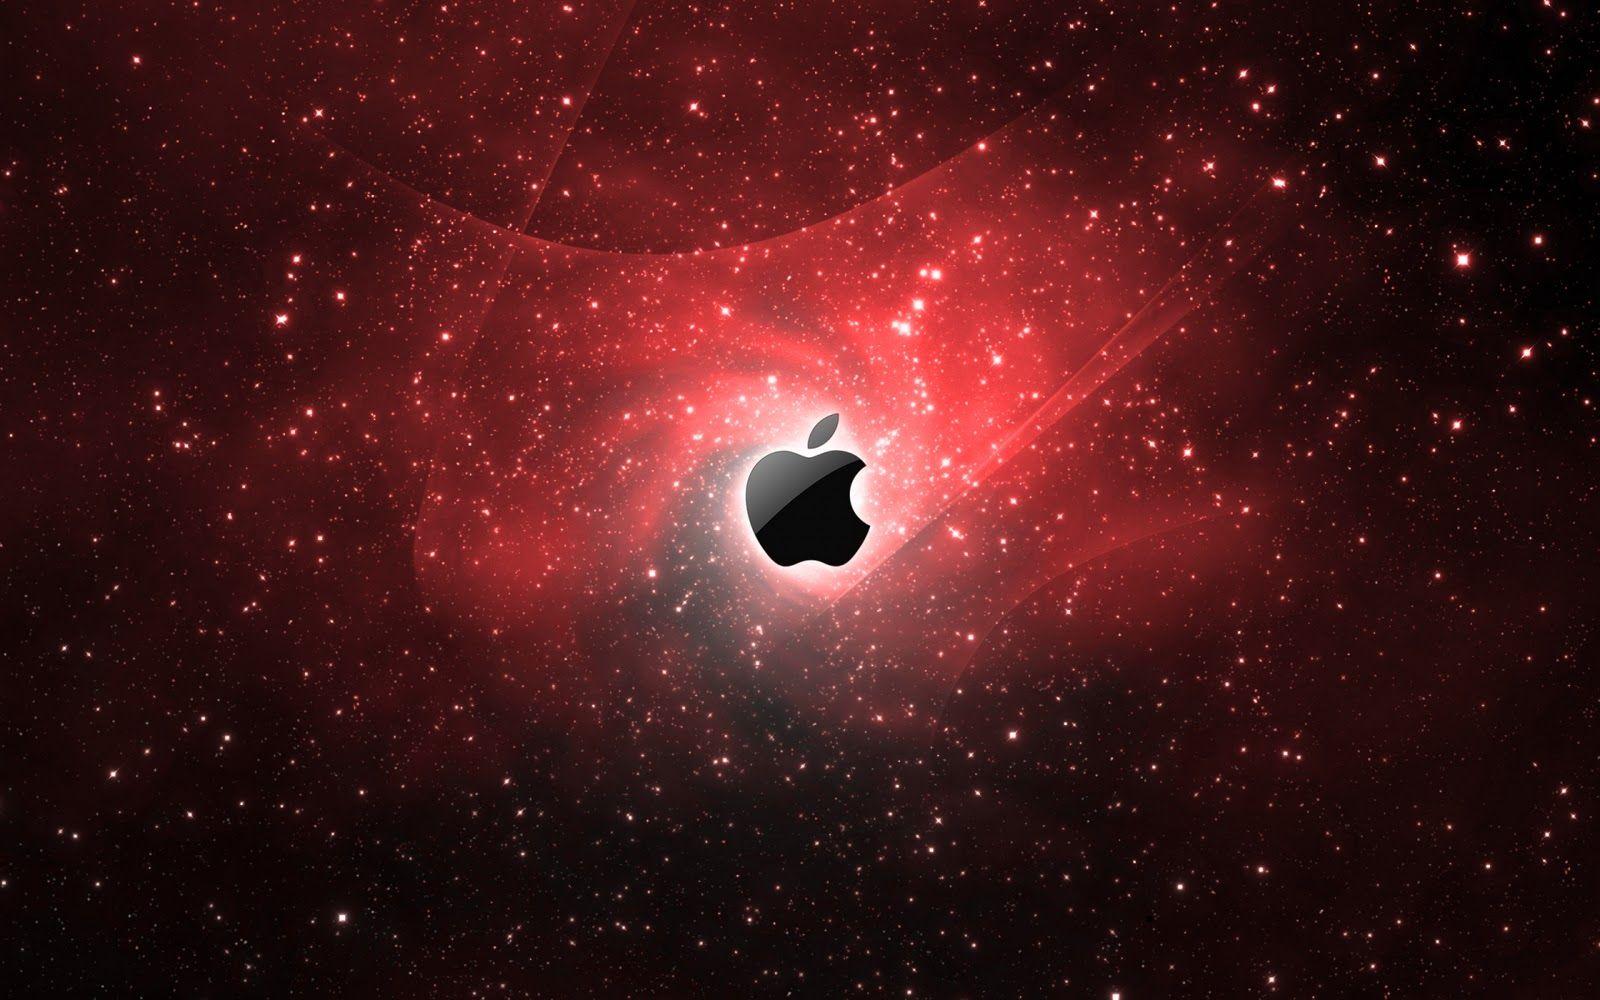 Black and Red Apple Logo - Red Apple Logo Wallpaper, image collections of wallpaper